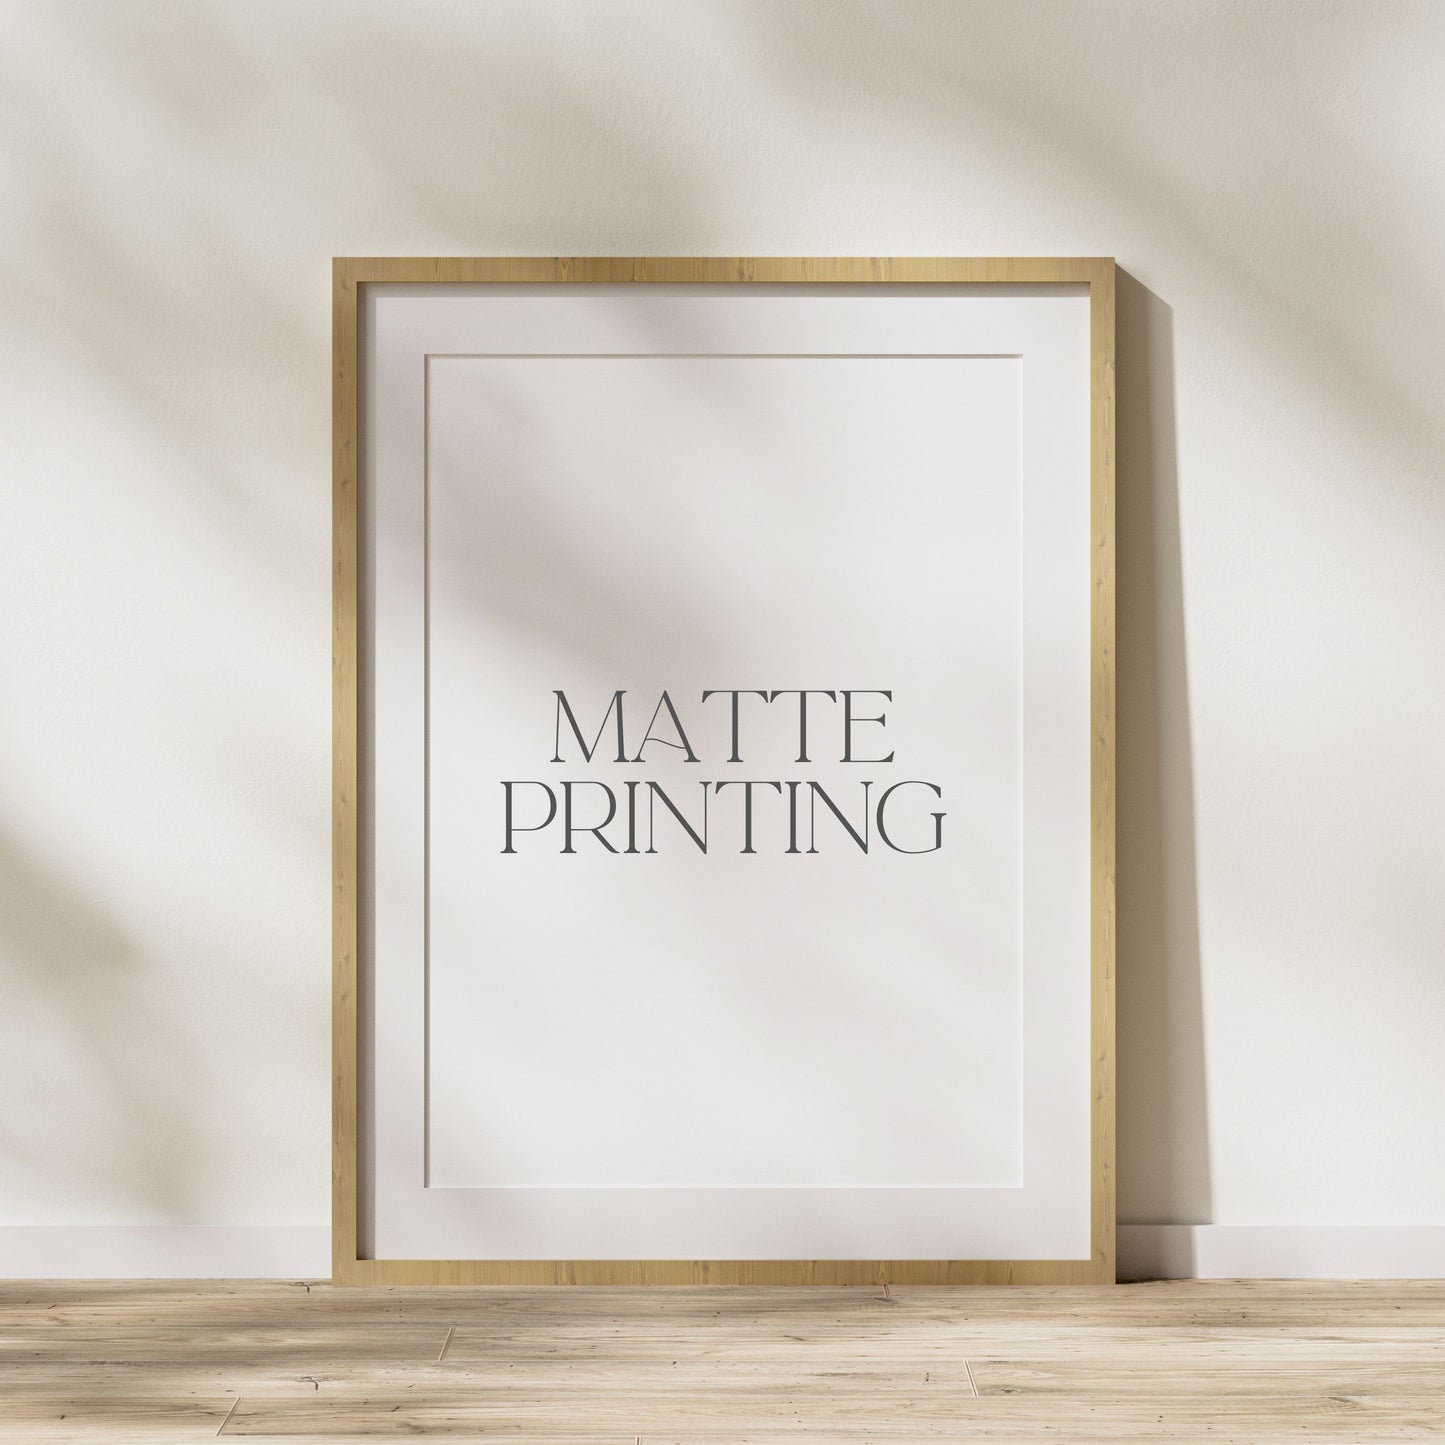 fine art matte printing (smooth pearl) | A4